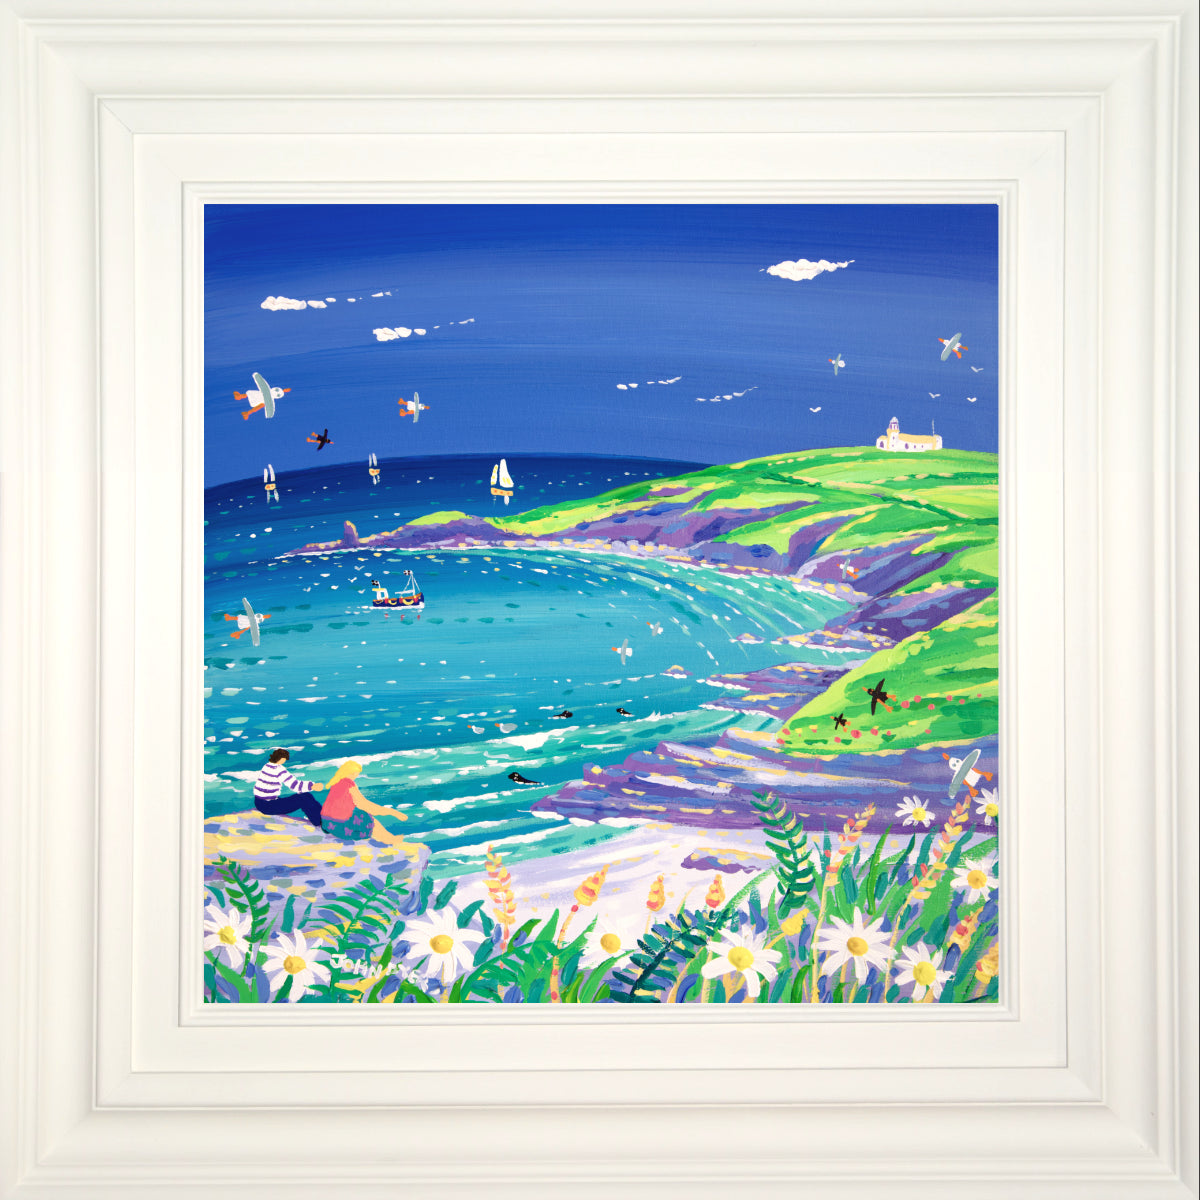 John Dyer Painting. The Sound of the Sea, Housel Bay